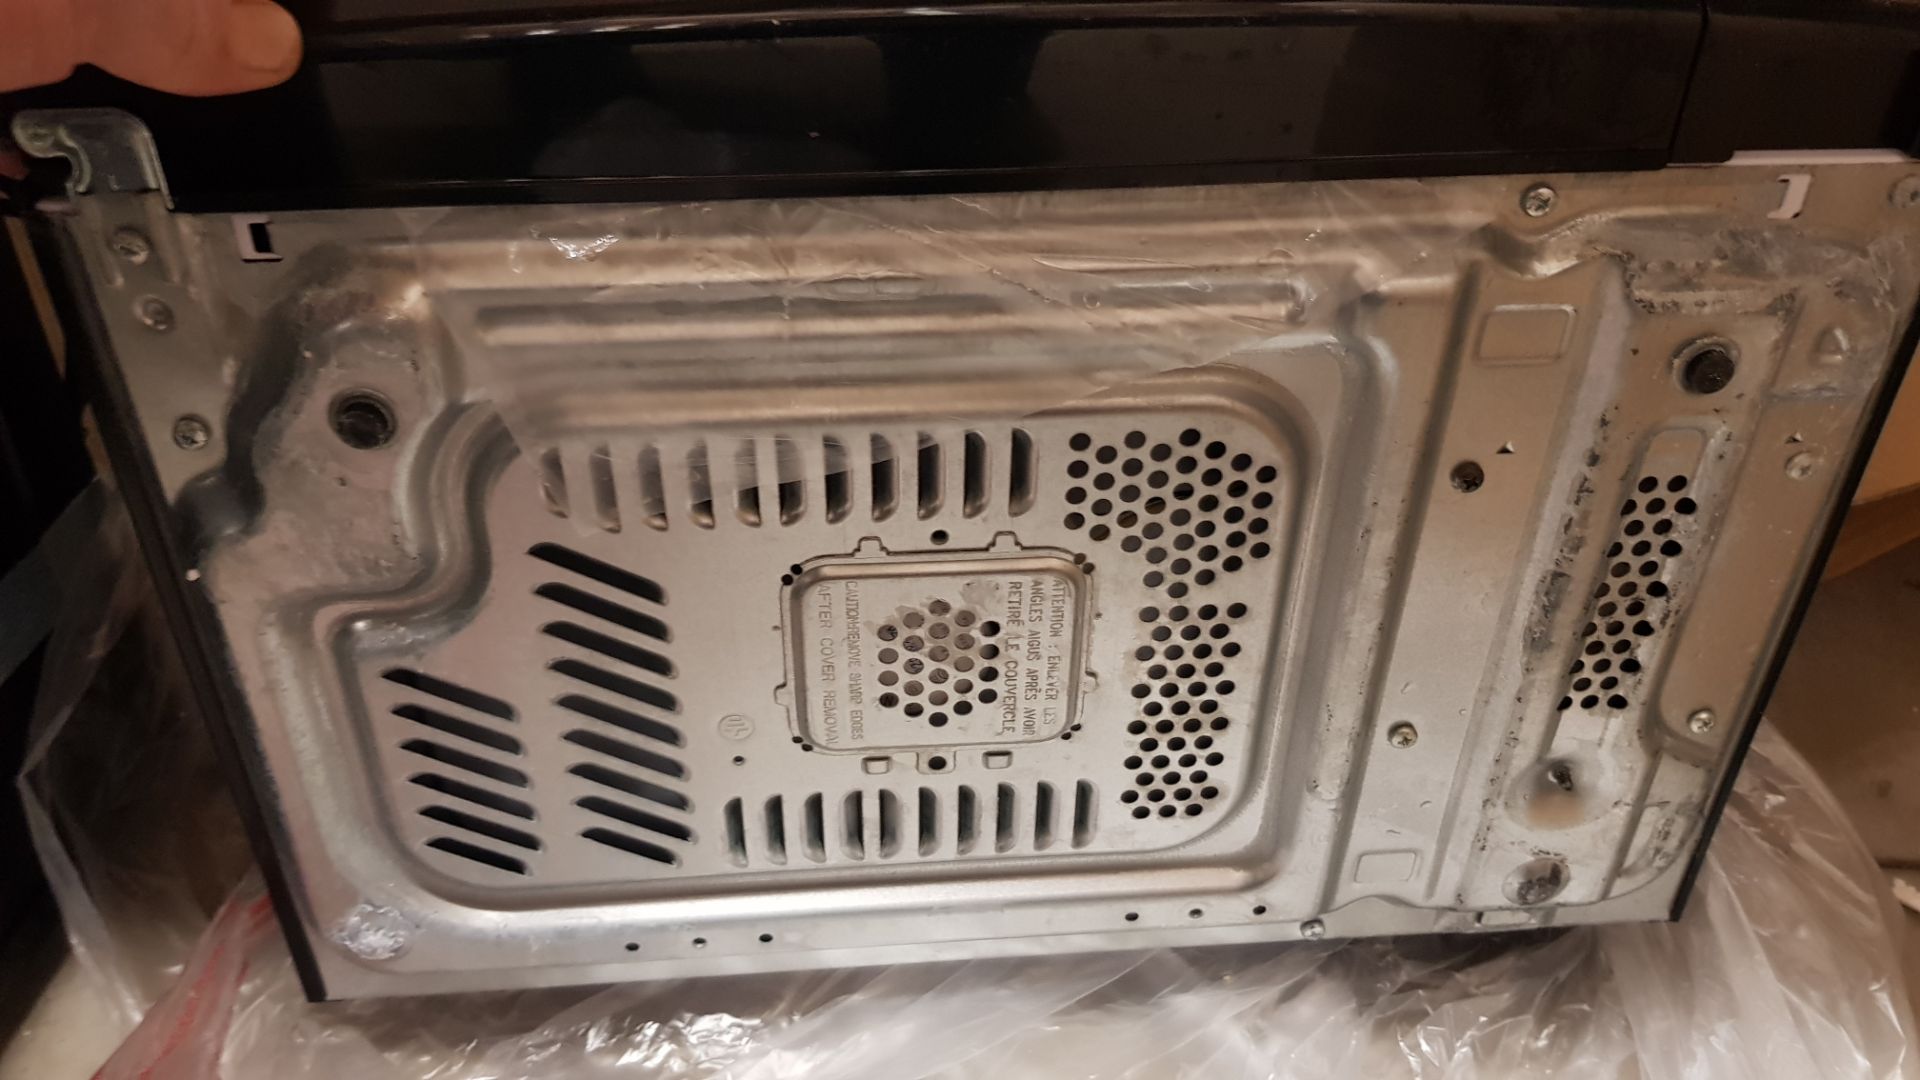 2x Microwave Oven Black 700W 17L (GMM001NB-18) RRP £60 Each. (Spares Or Repairs). - Image 8 of 8